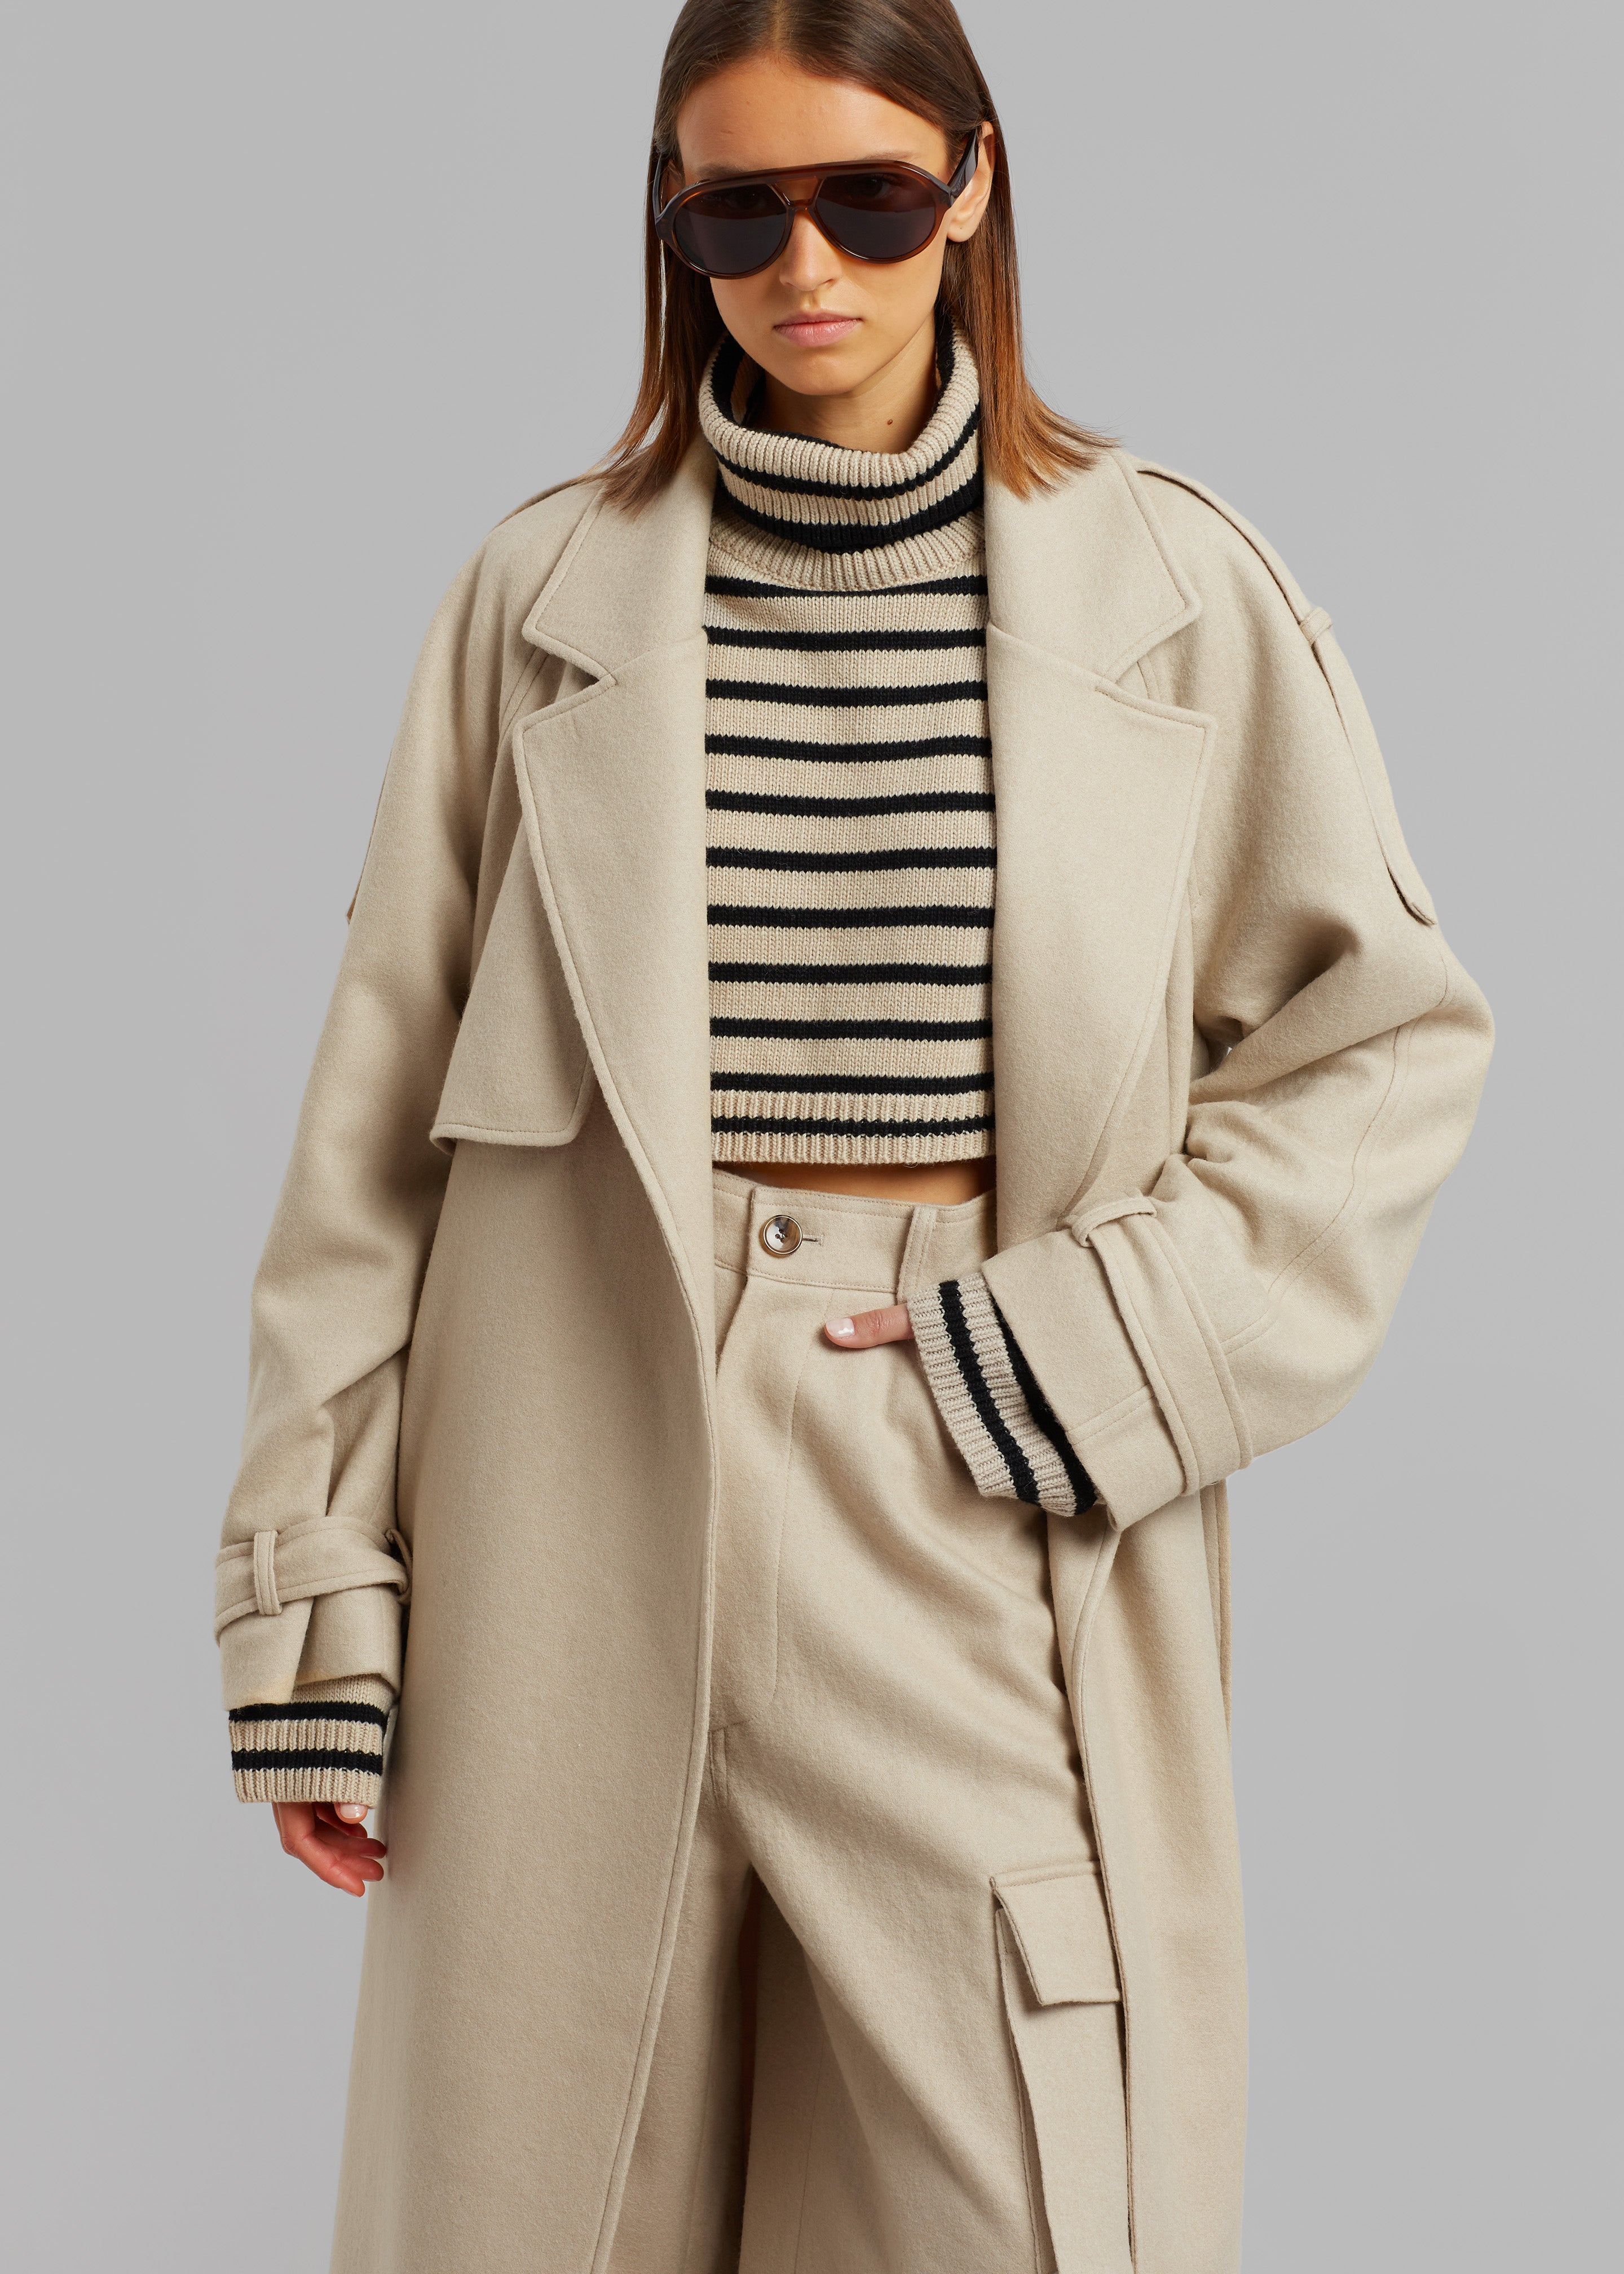 Suzanne Boiled Wool Trench Coat - Beige - 2